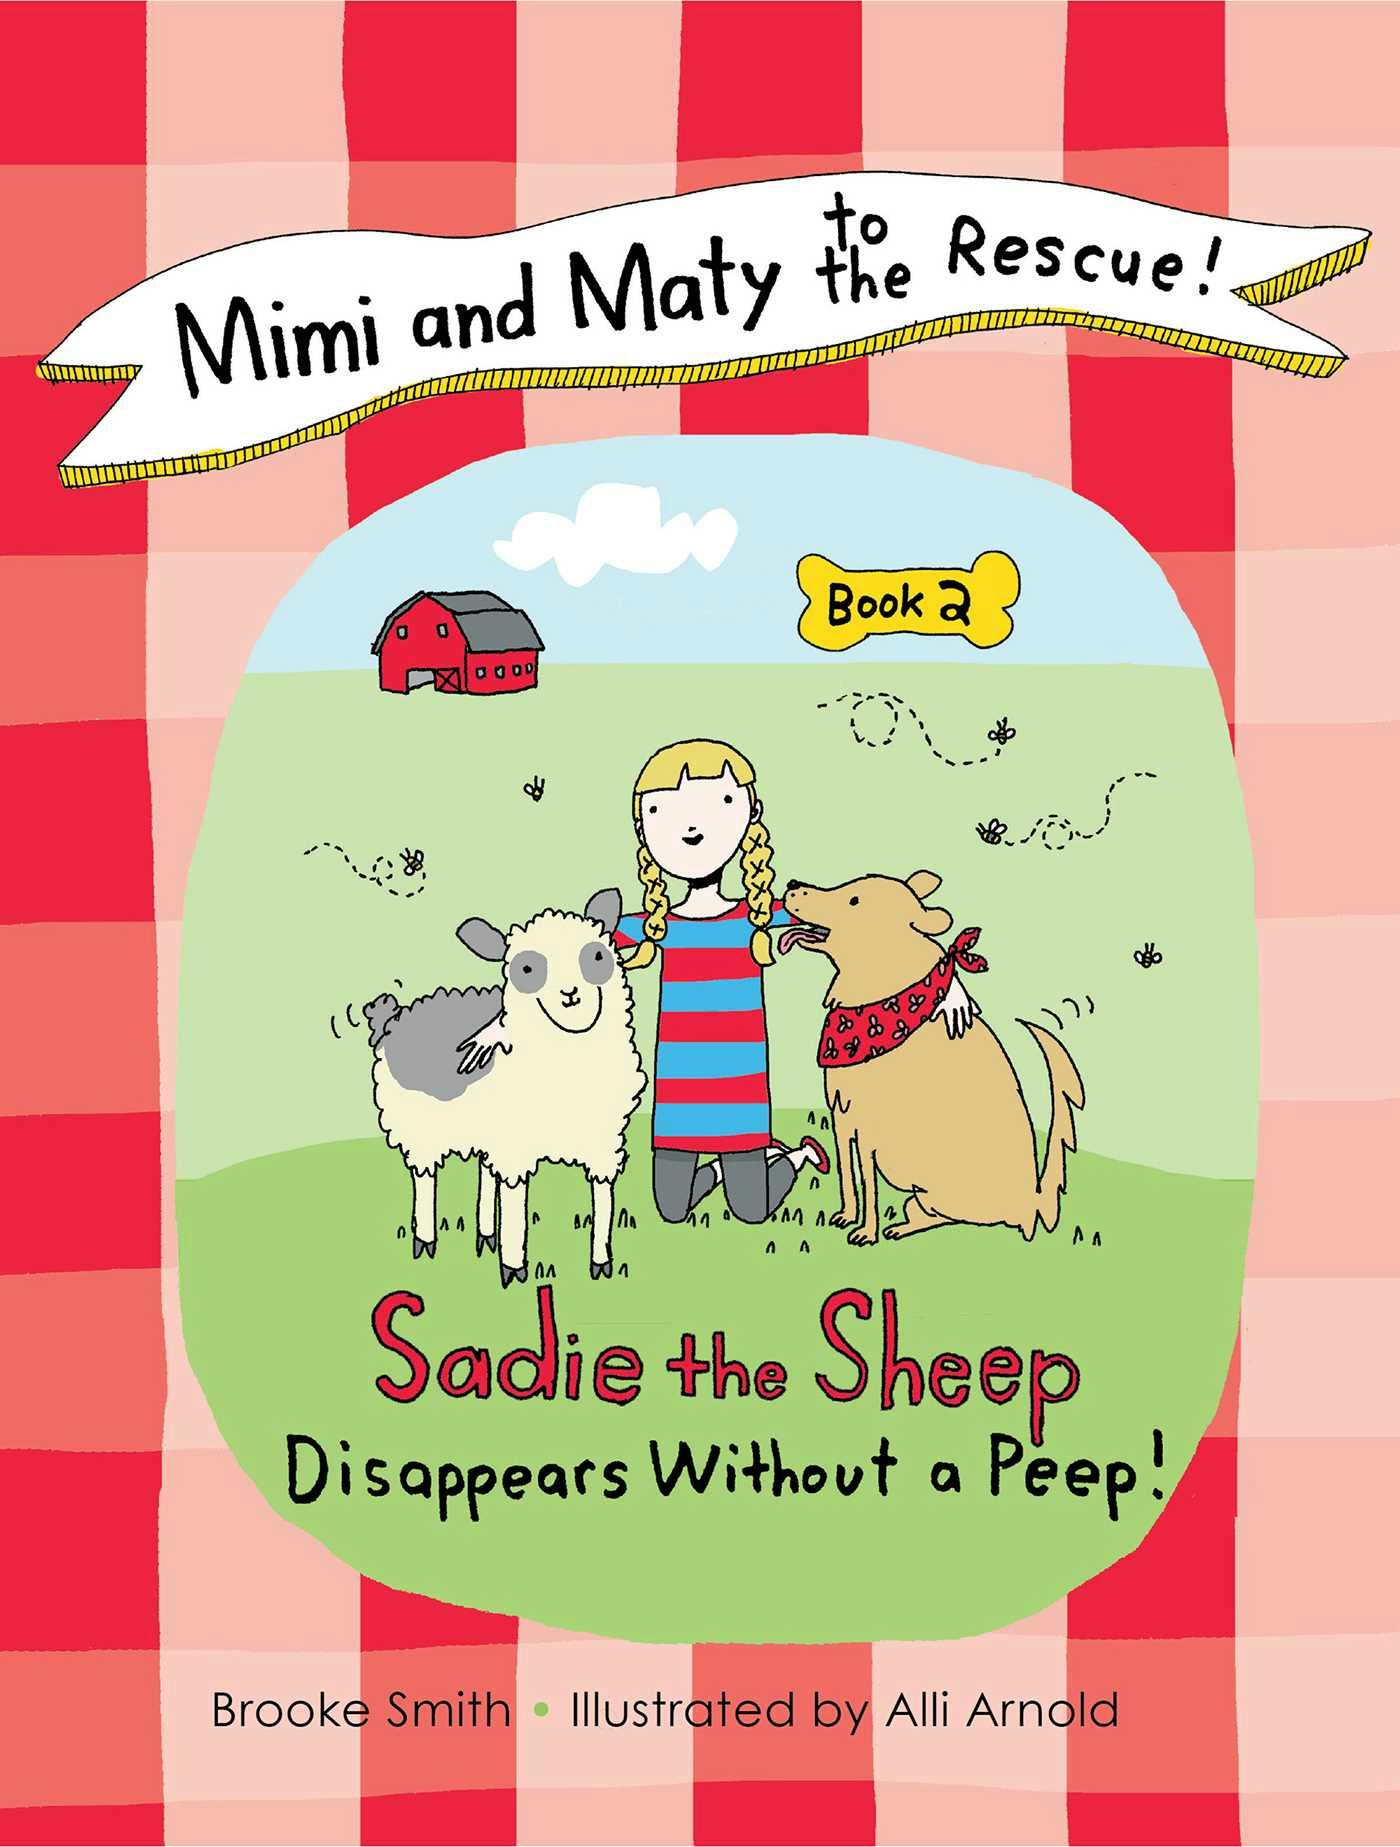 Mimi and Maty to the Rescue!: Book 2: Sadie the Sheep Disappears Without a Peep! - Brooke Smith